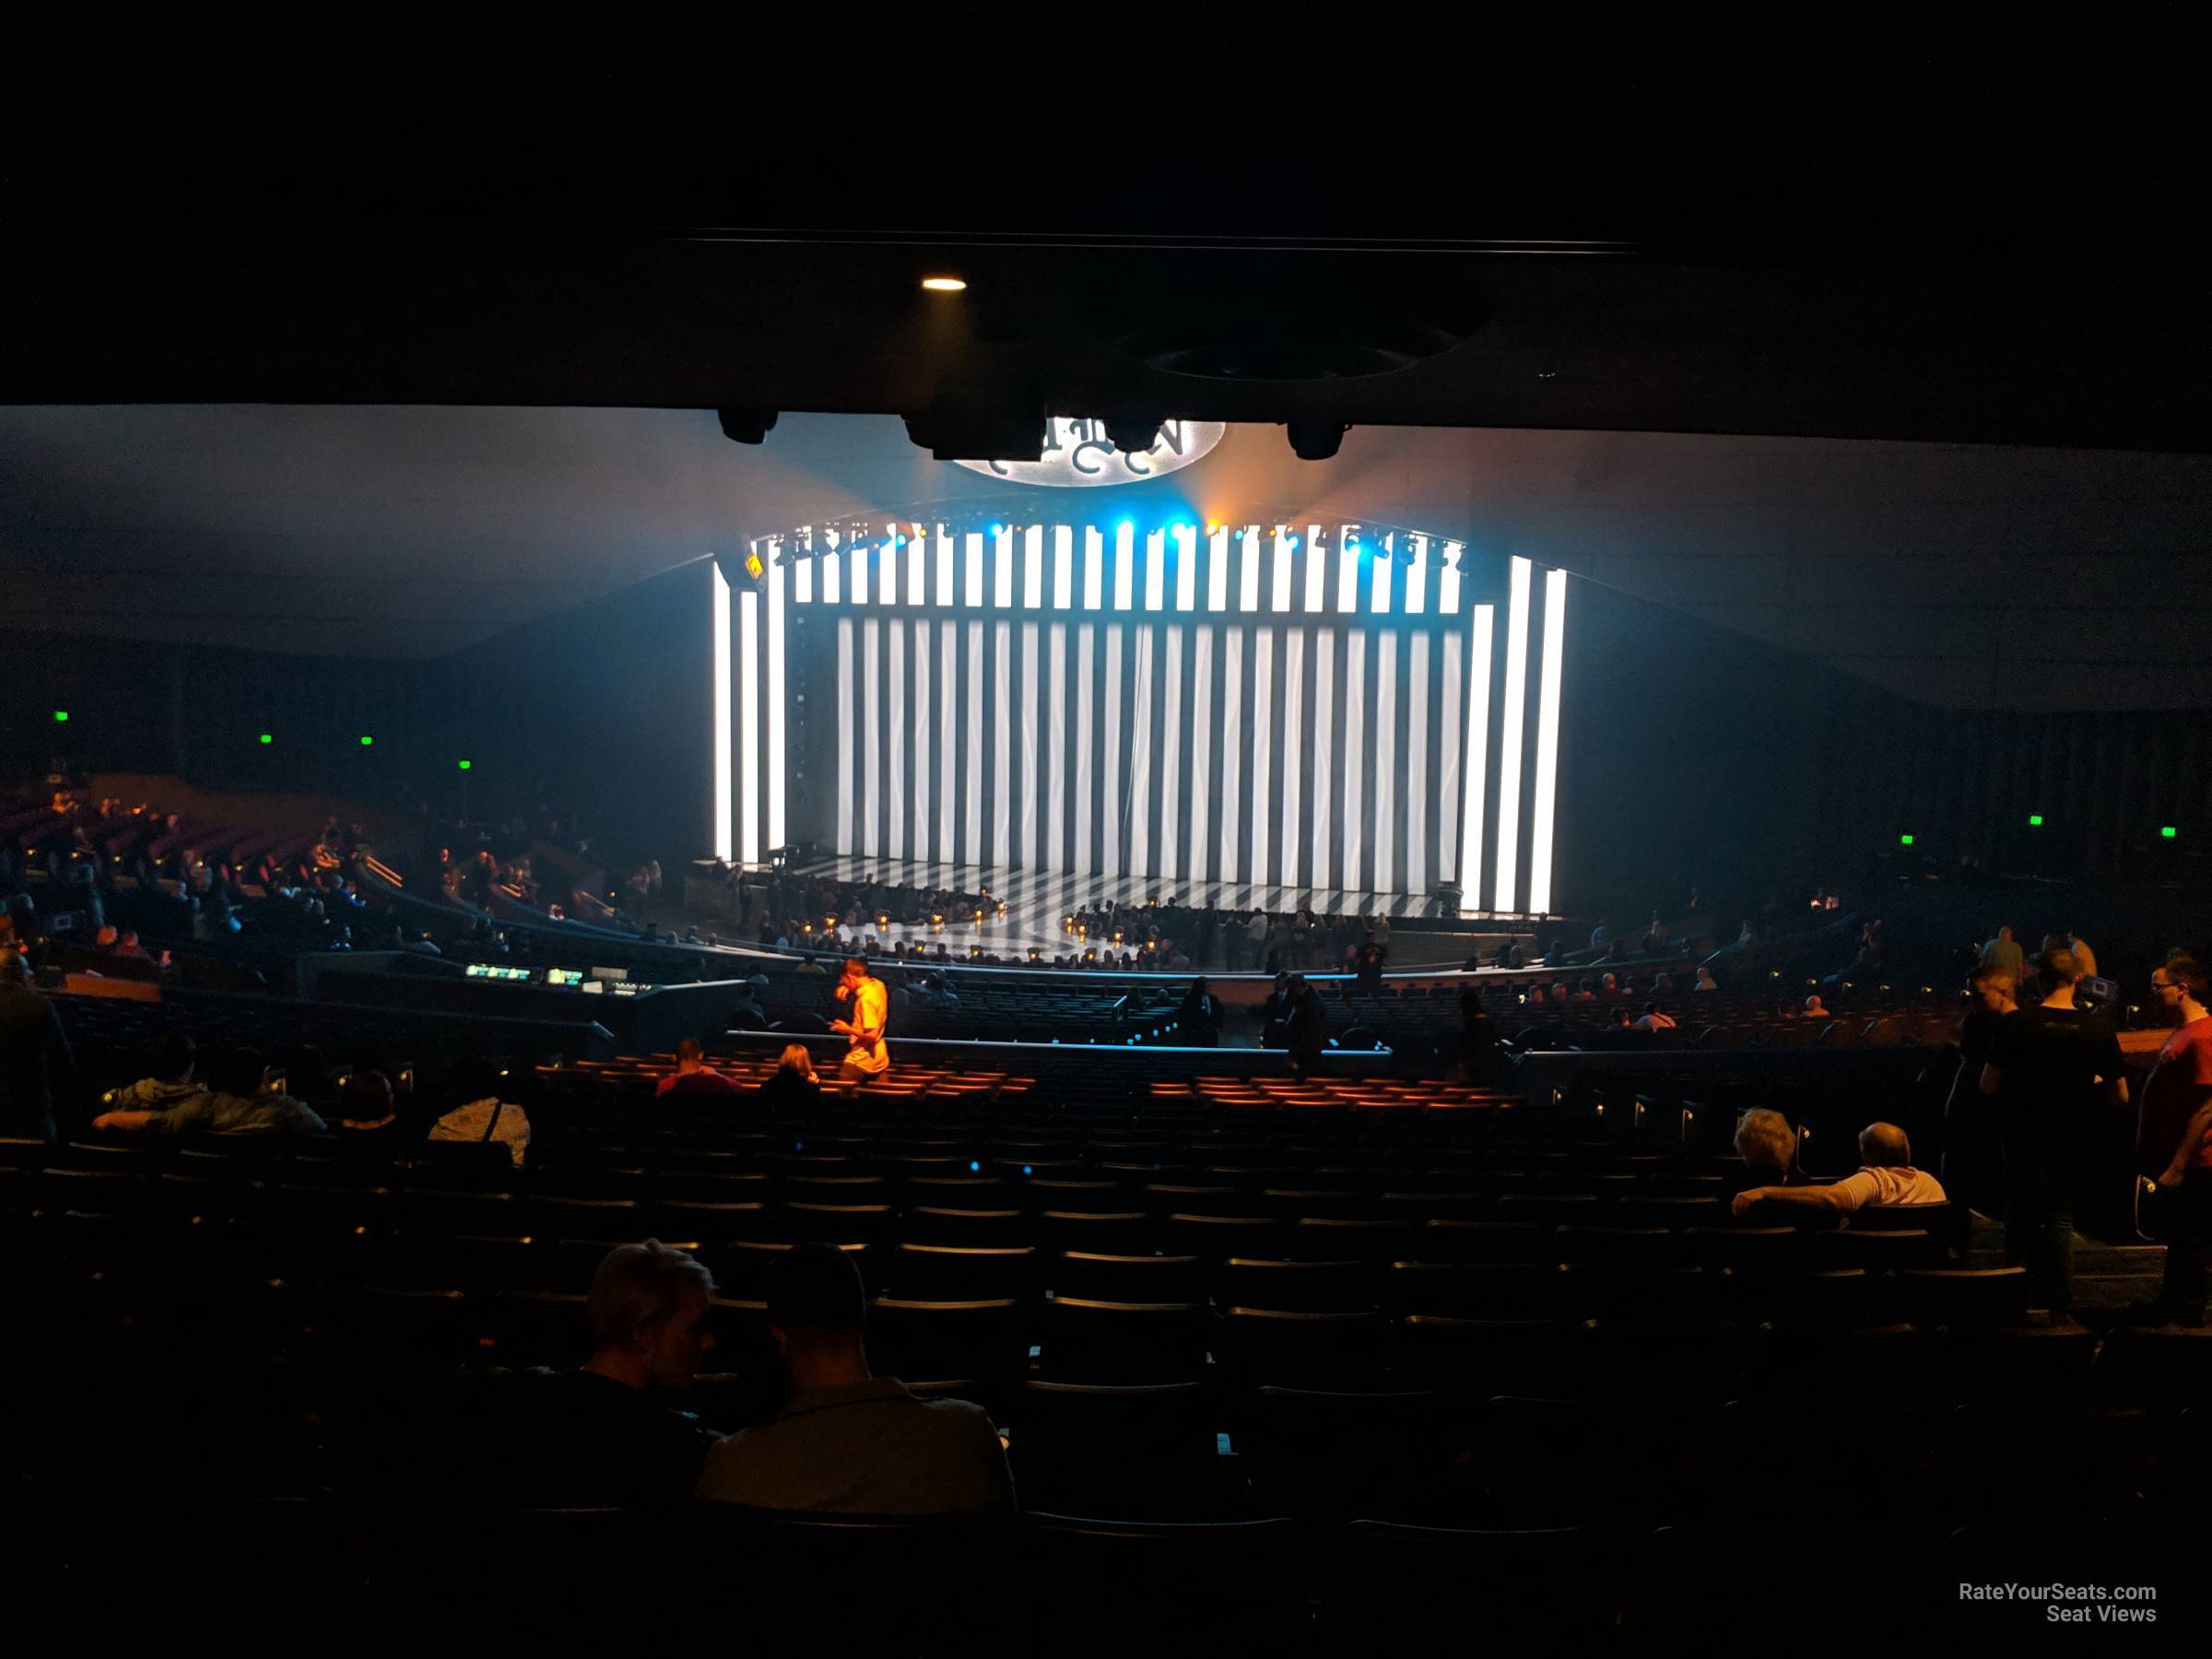 section 204, row y seat view  - bakkt theater at planet hollywood